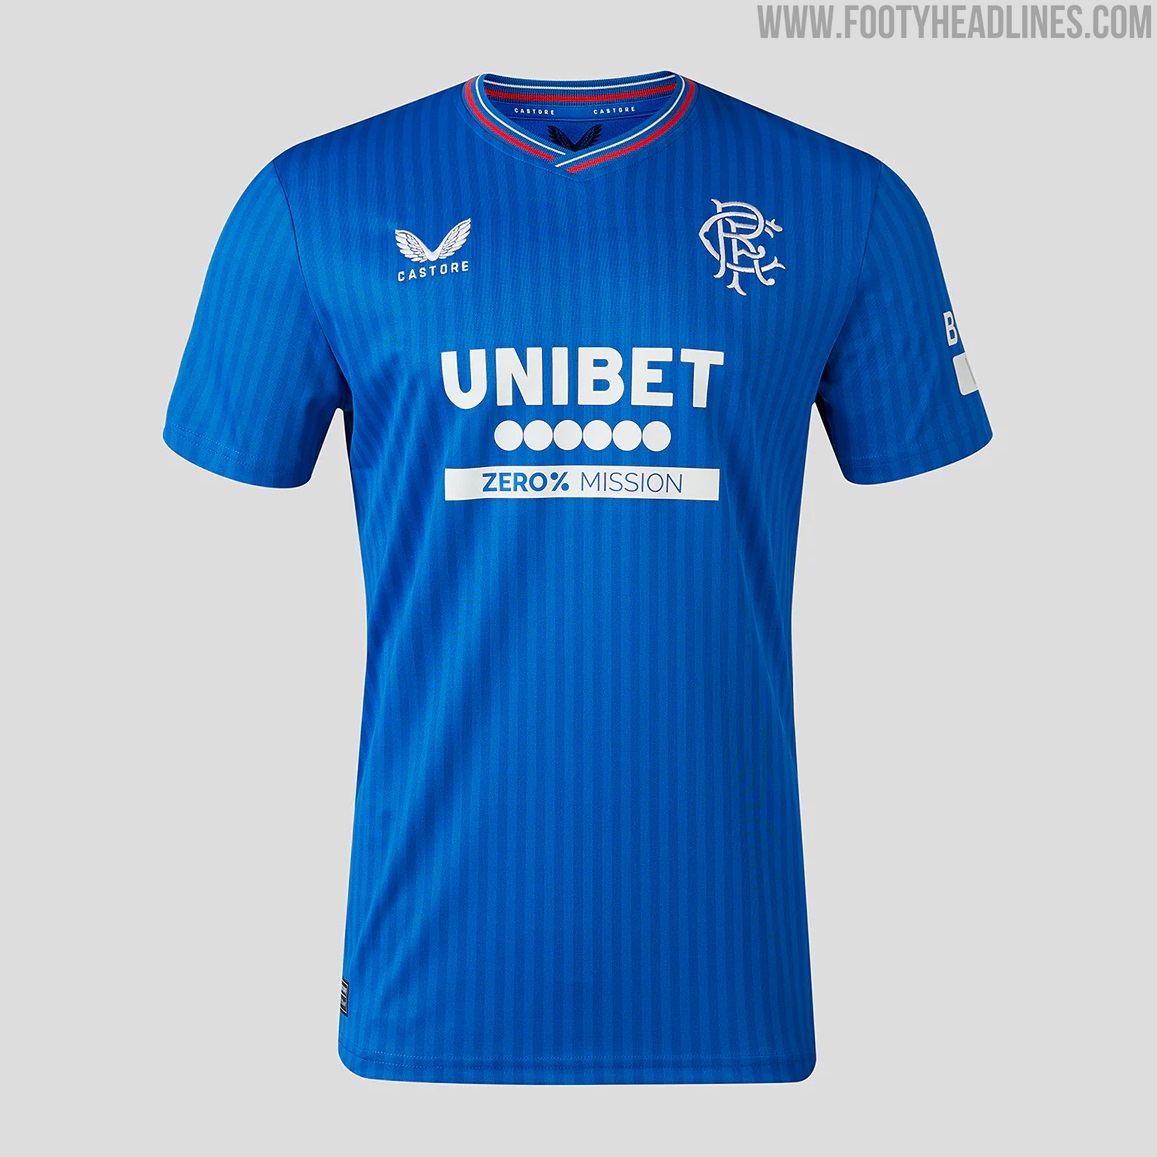 Rangers New Kit 23/24 Released: First Look, Cost, Sponsor and How to Buy